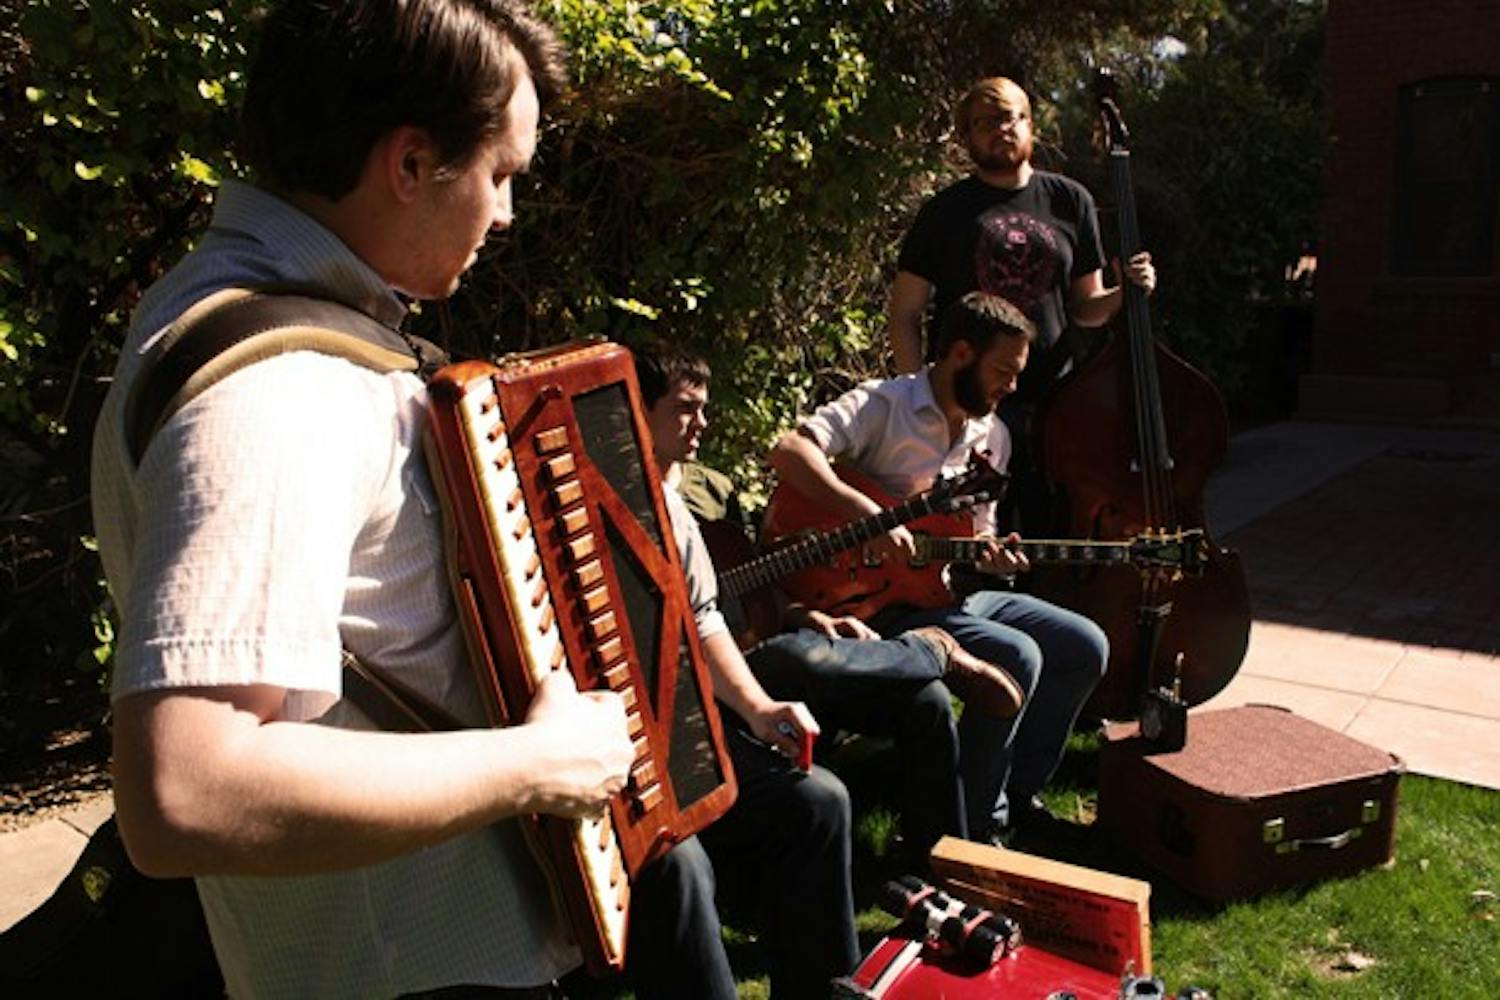 The band incorporates a folk sound through its wide-range of instruments, from the accordion to the upright bass.
Photo by Noemi Gonzalez